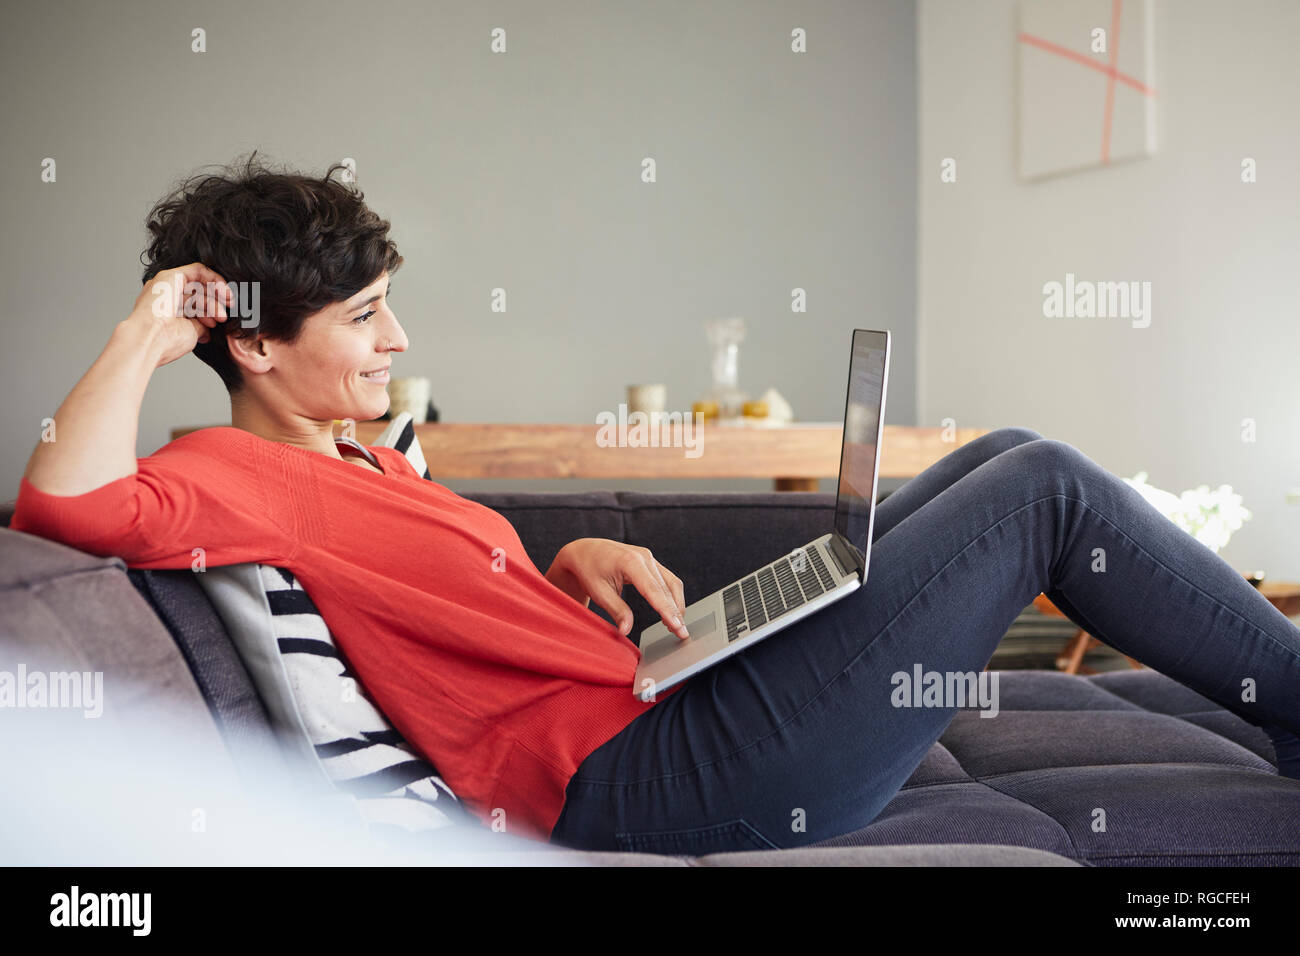 Smiling woman using laptop on couch at home Stock Photo